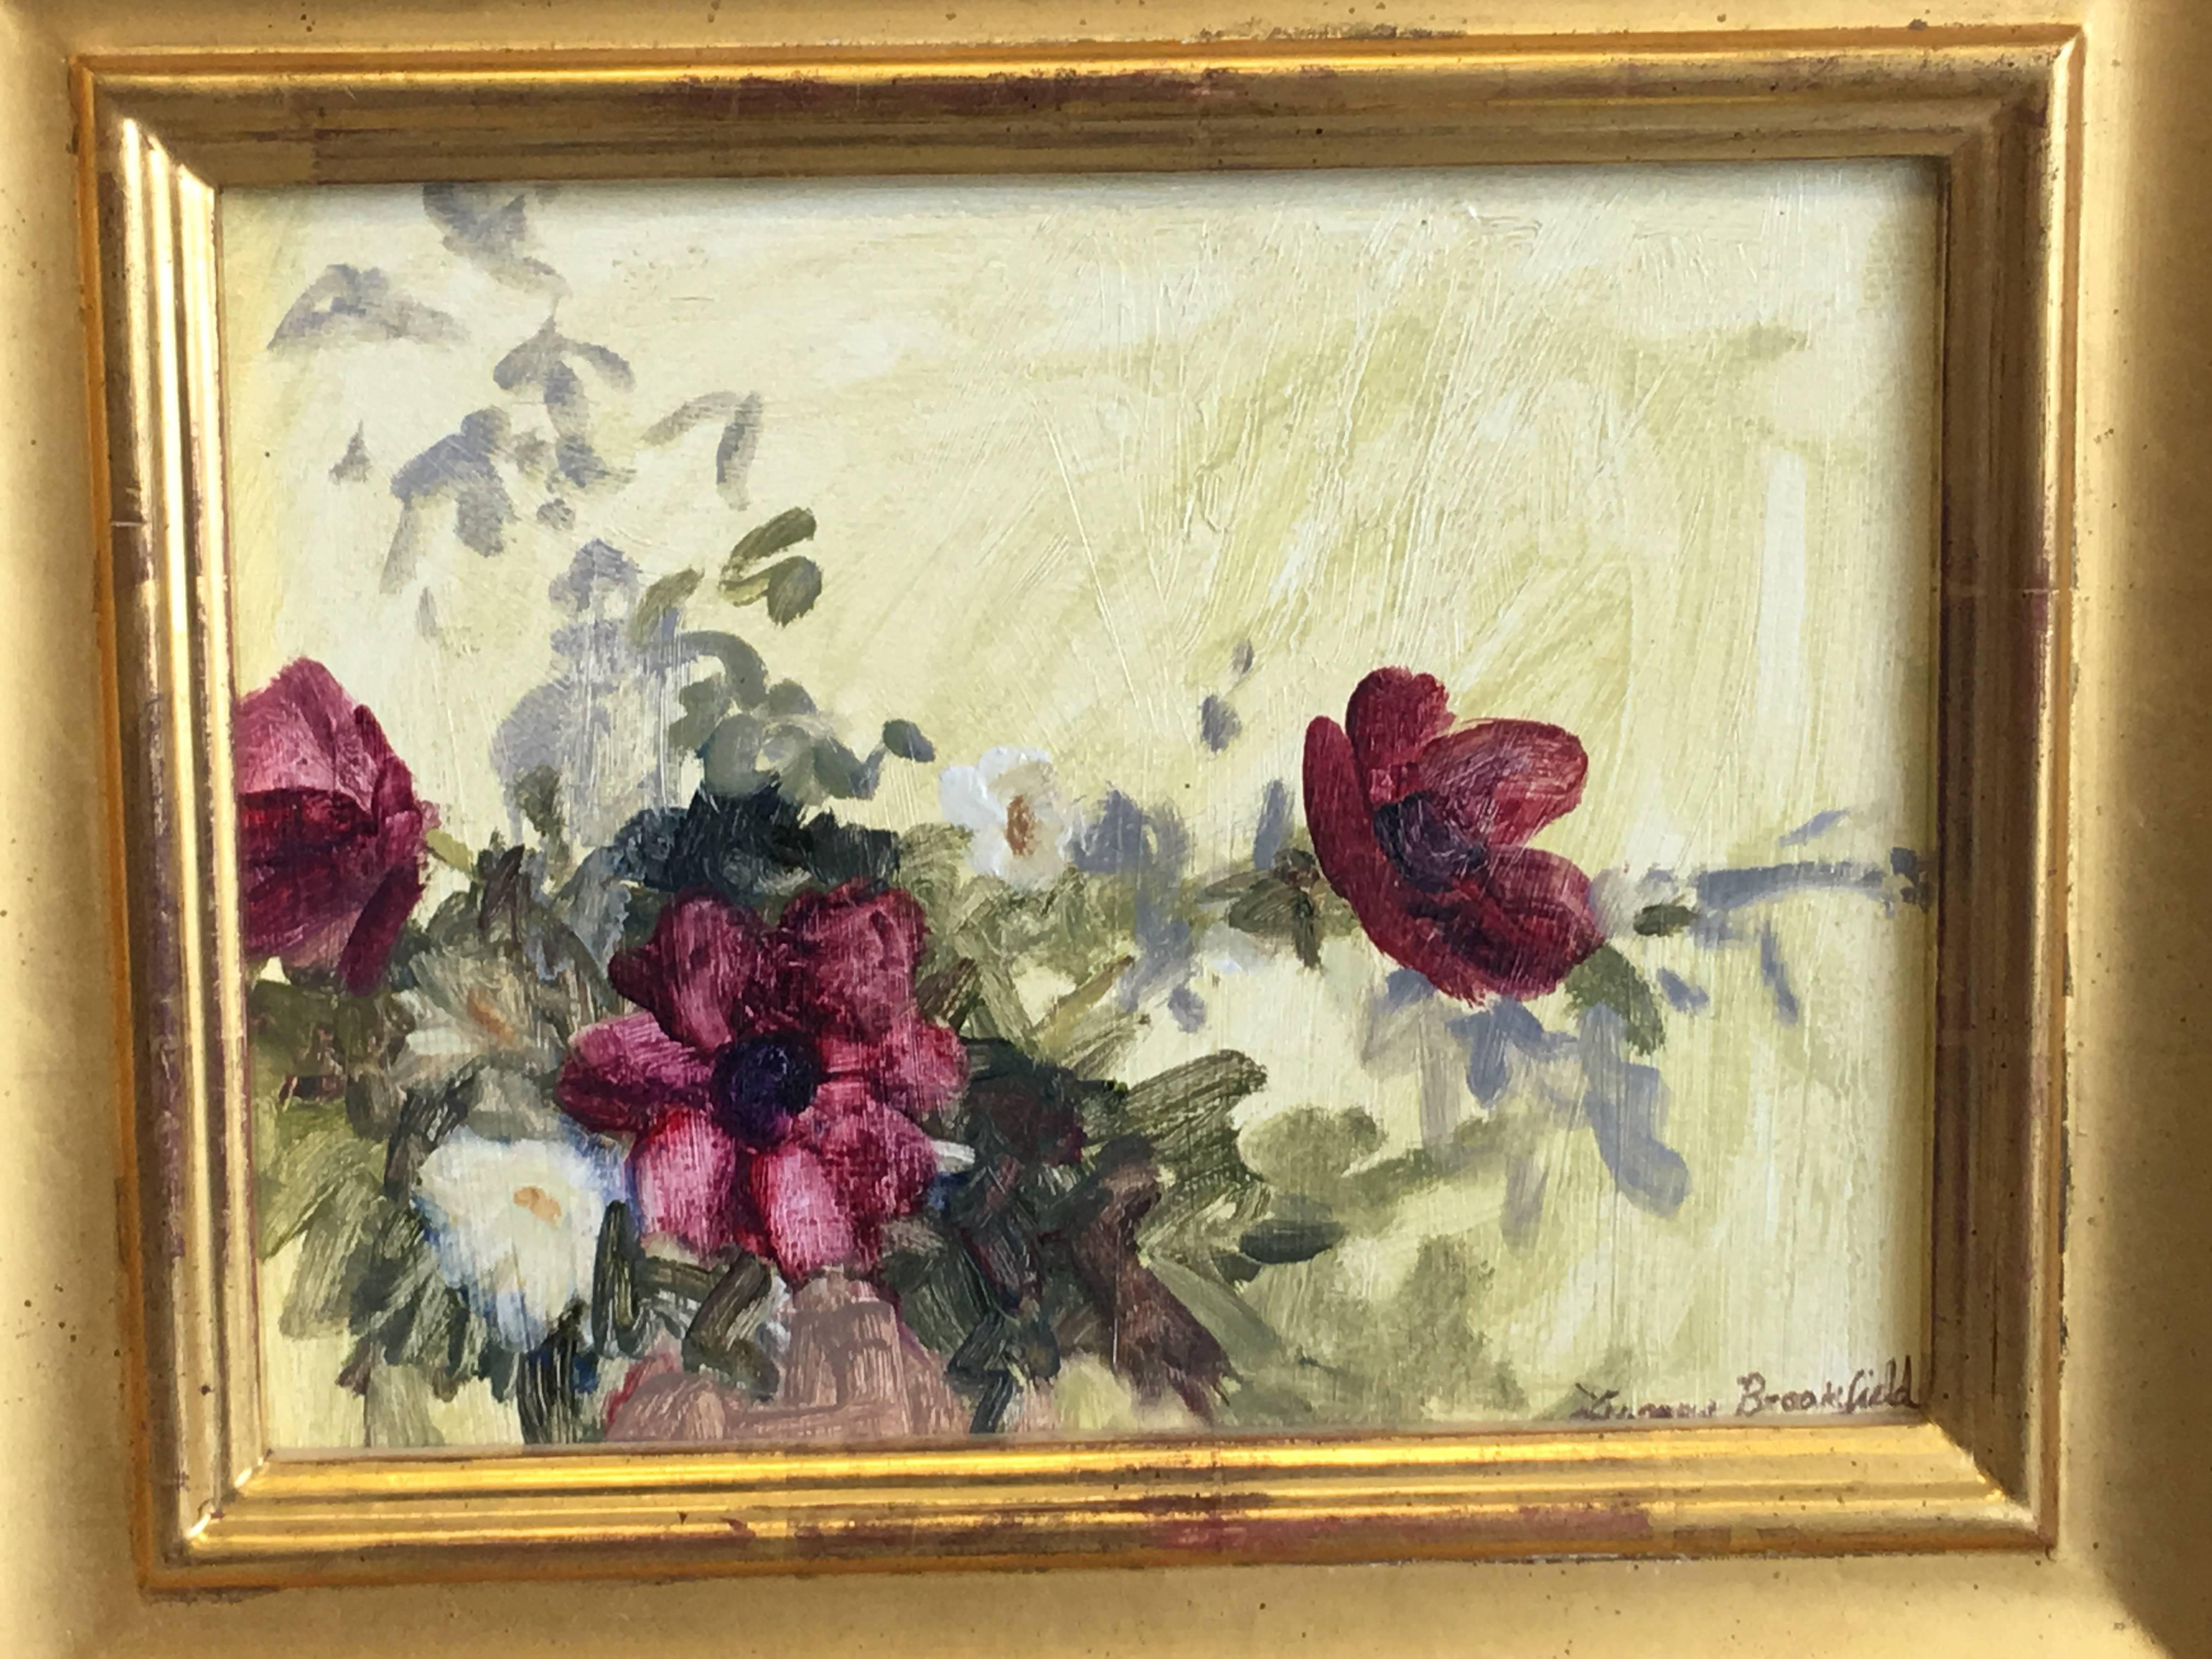 Hand-Painted Floral Oil on Canvas Painting in 22-Karat Gilded Frame, Lynn Brookfield